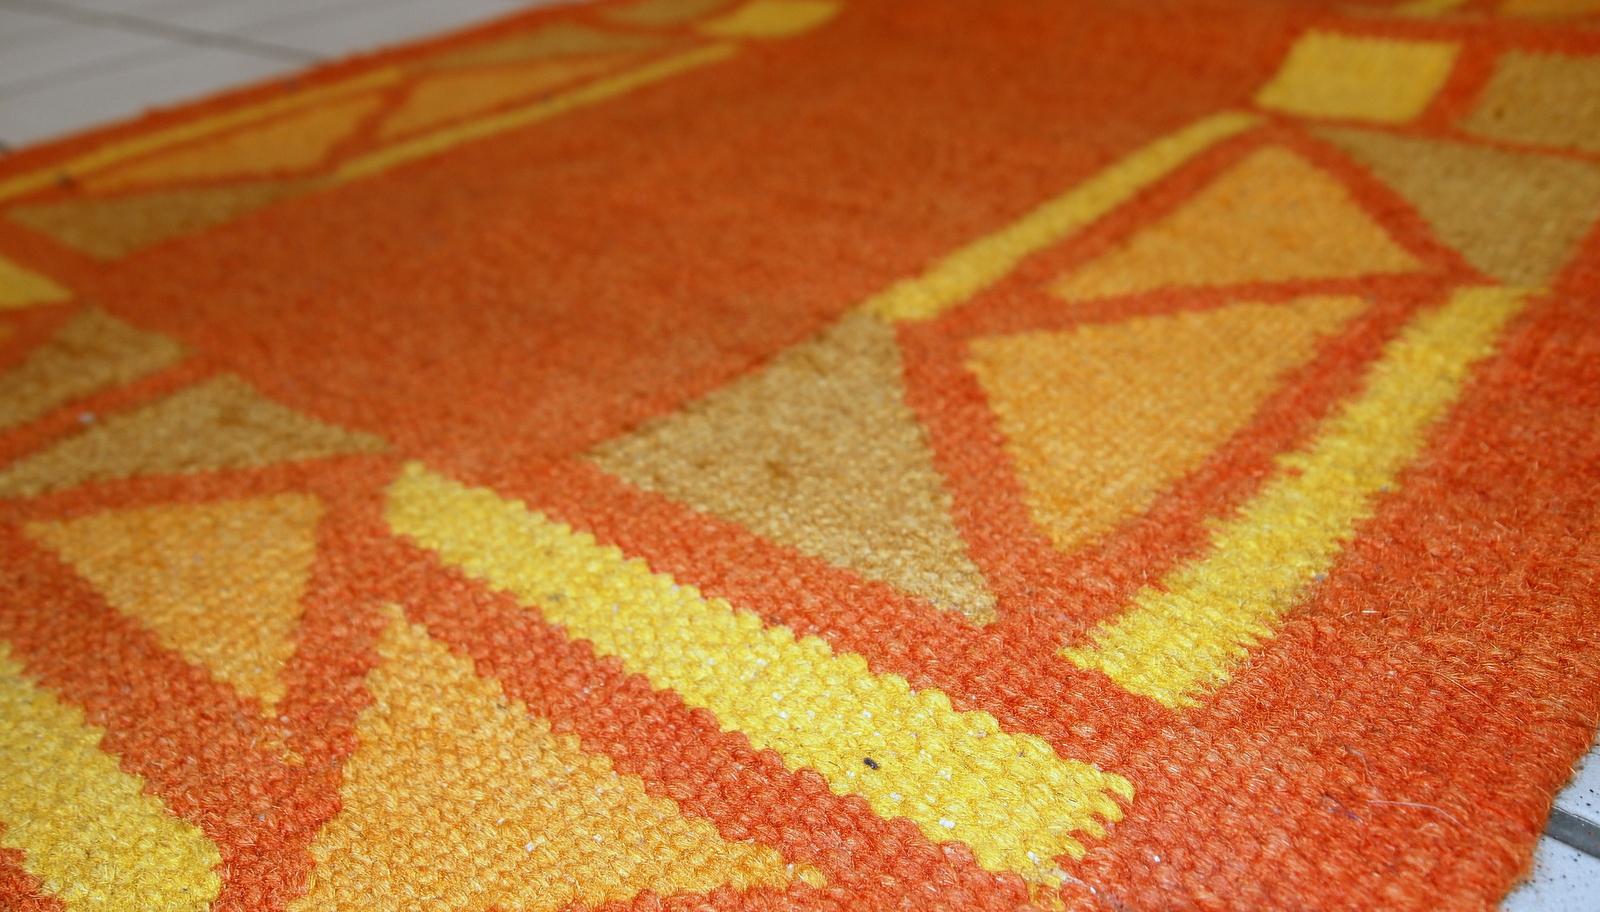 Vintage Gabbeh style flat-weave in original good condition. This Kilim is in a bright shades of orange, yellow and olive green.

-condition: original good,

-circa: 1970s,

-size: 2.3' x 4.5' ( 71cm x 138cm)?,

-material: wool,

-country